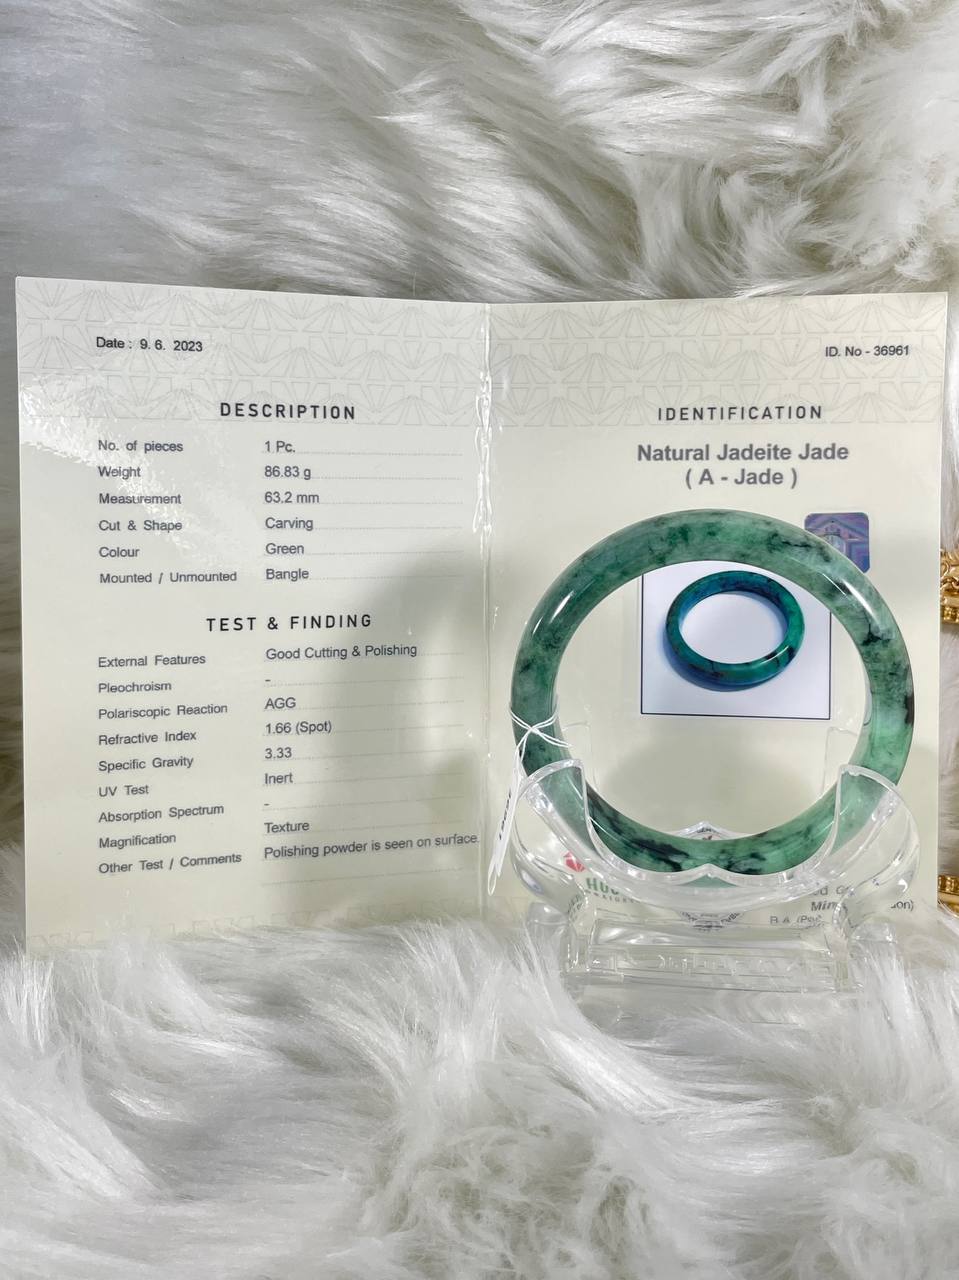 Grade A Natural Jade Bangle with certificate #36961